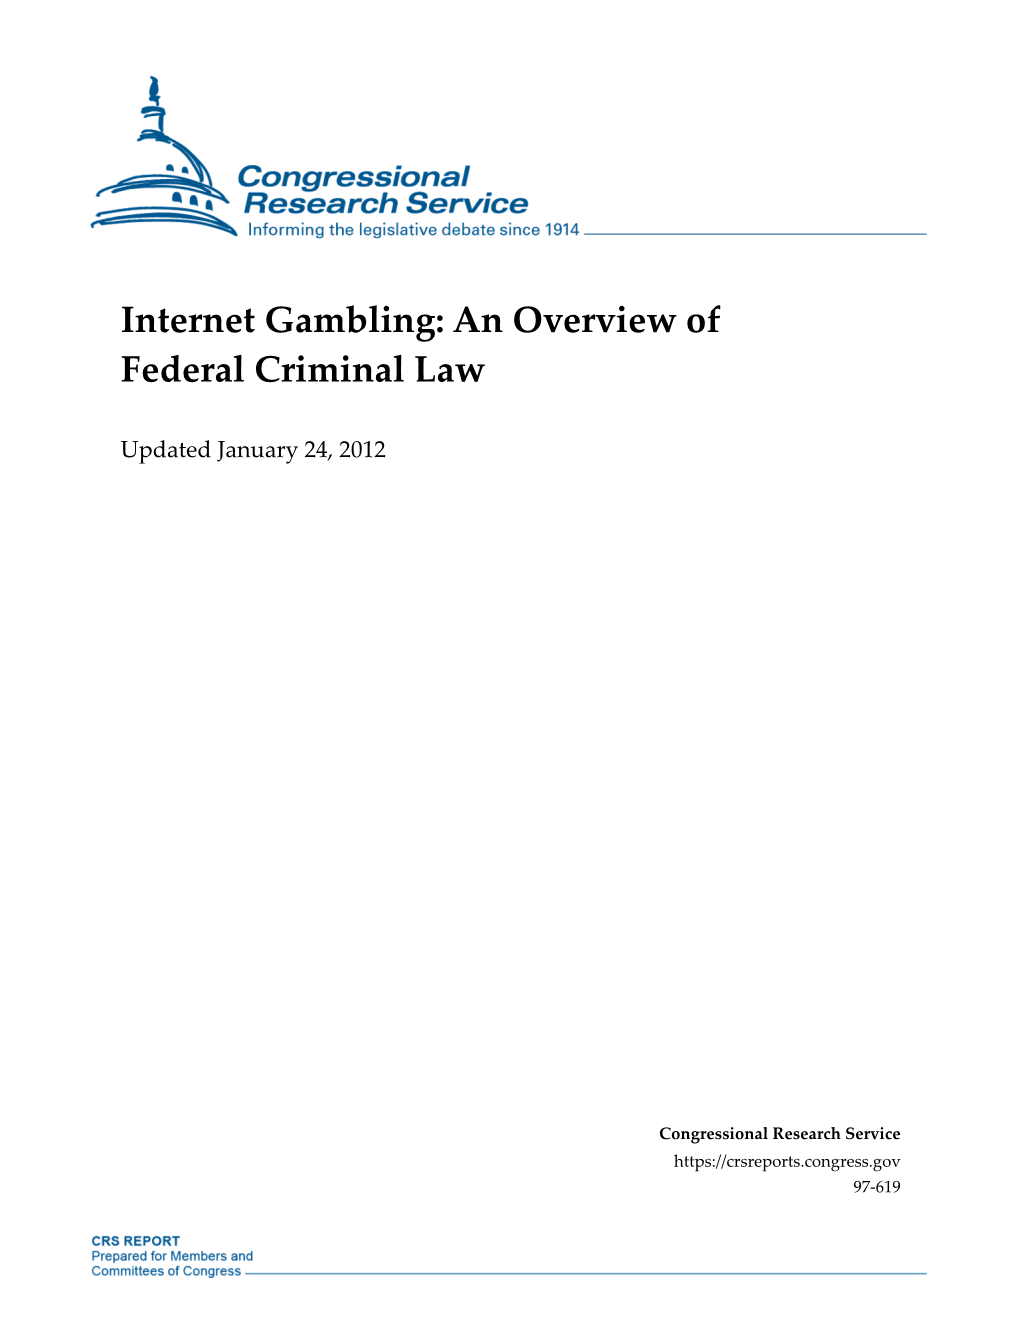 Internet Gambling: an Overview of Federal Criminal Law